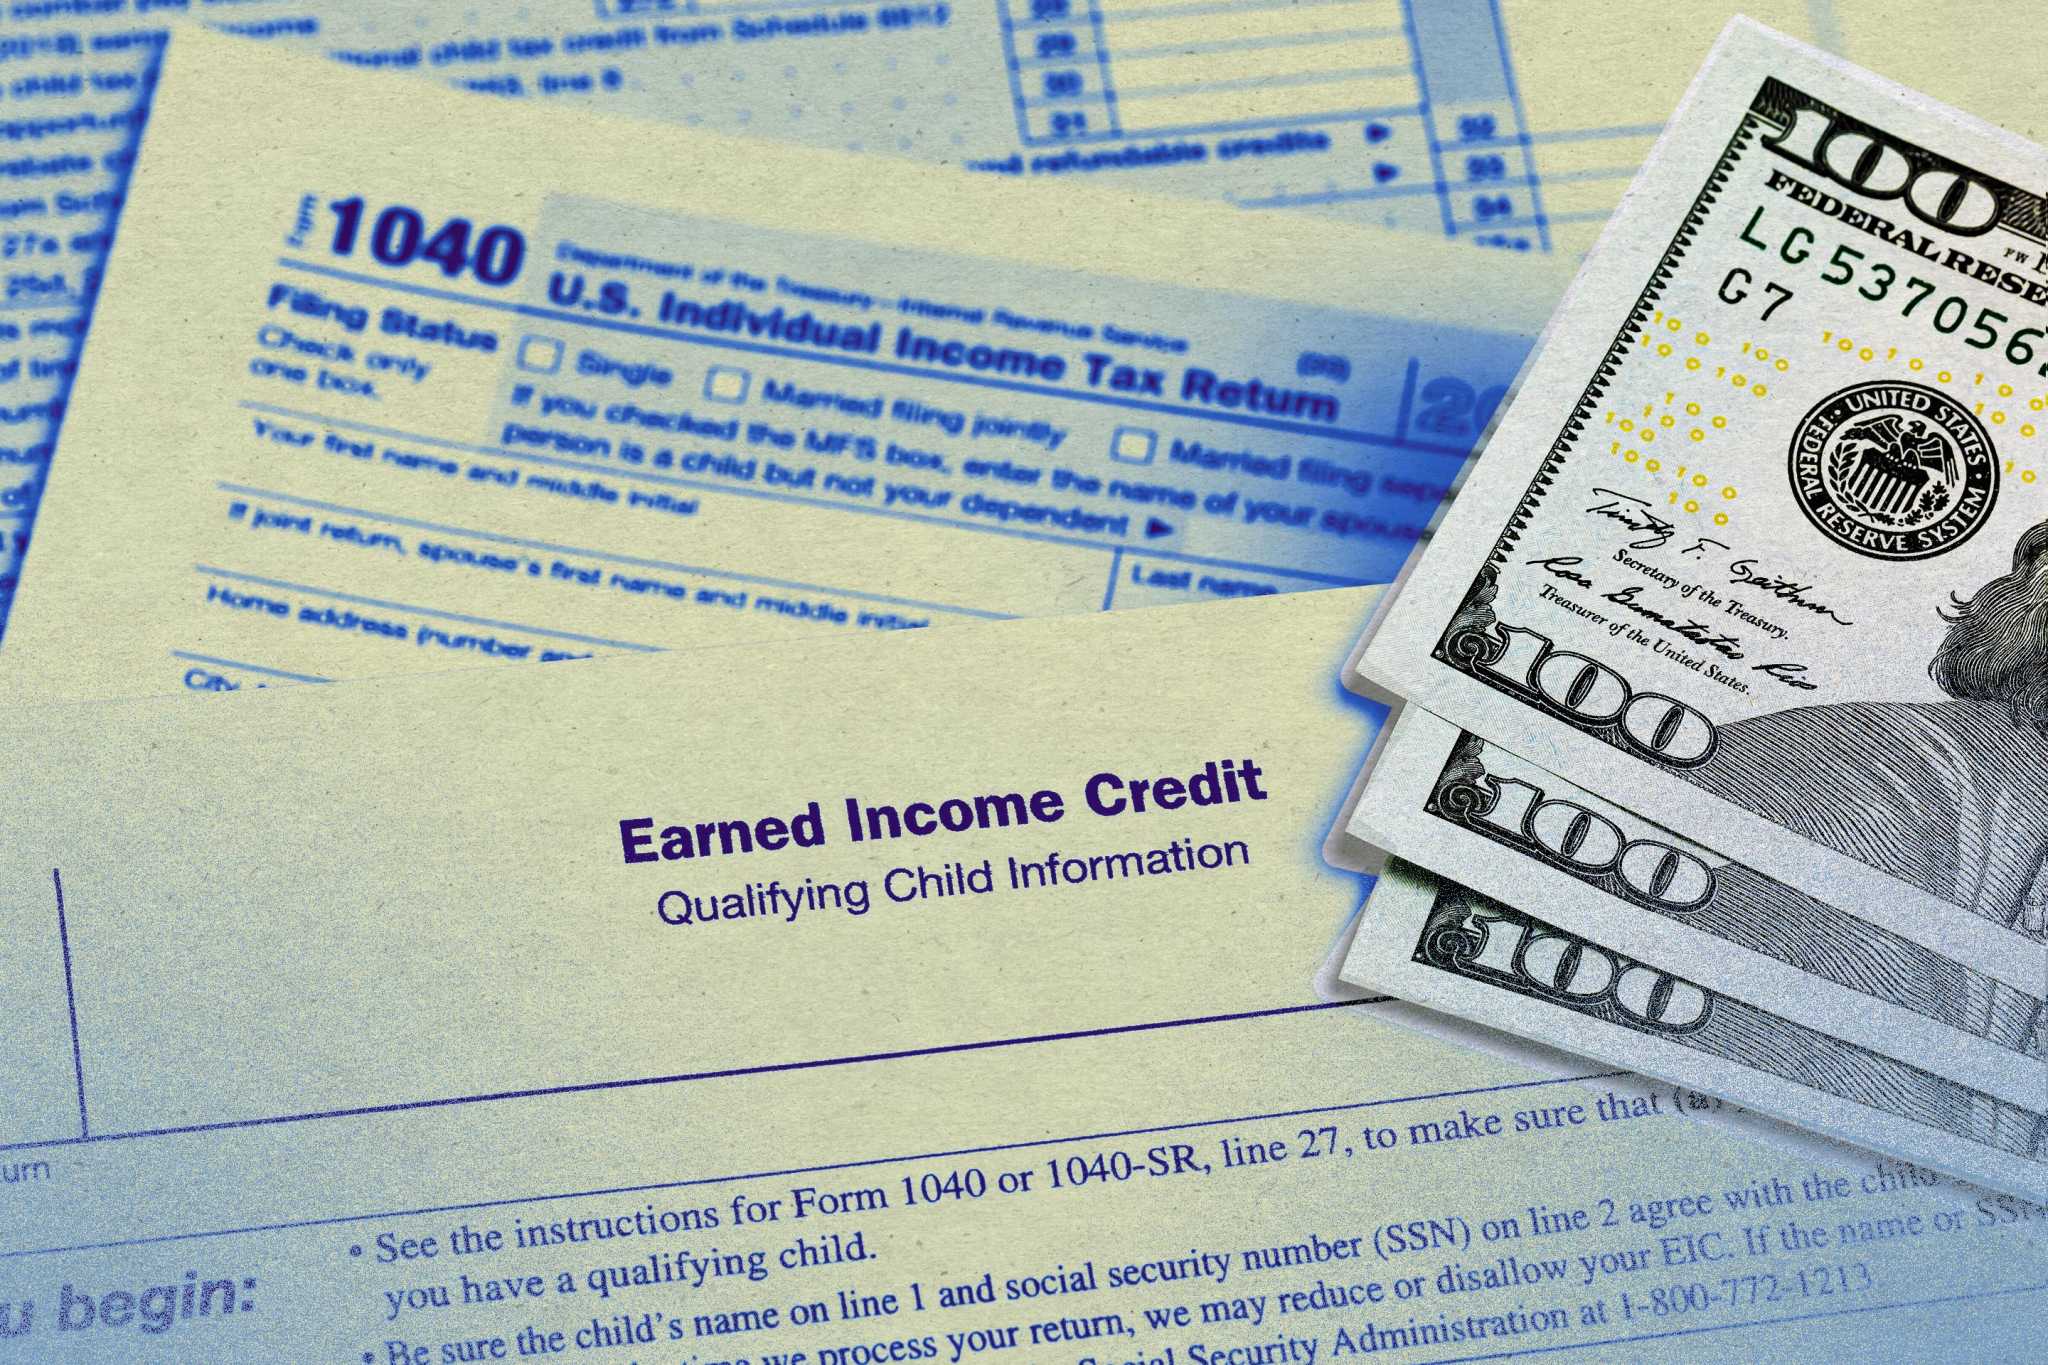 The IRS Is Sending Special Refund Checks to 1.6 Million Taxpayers This